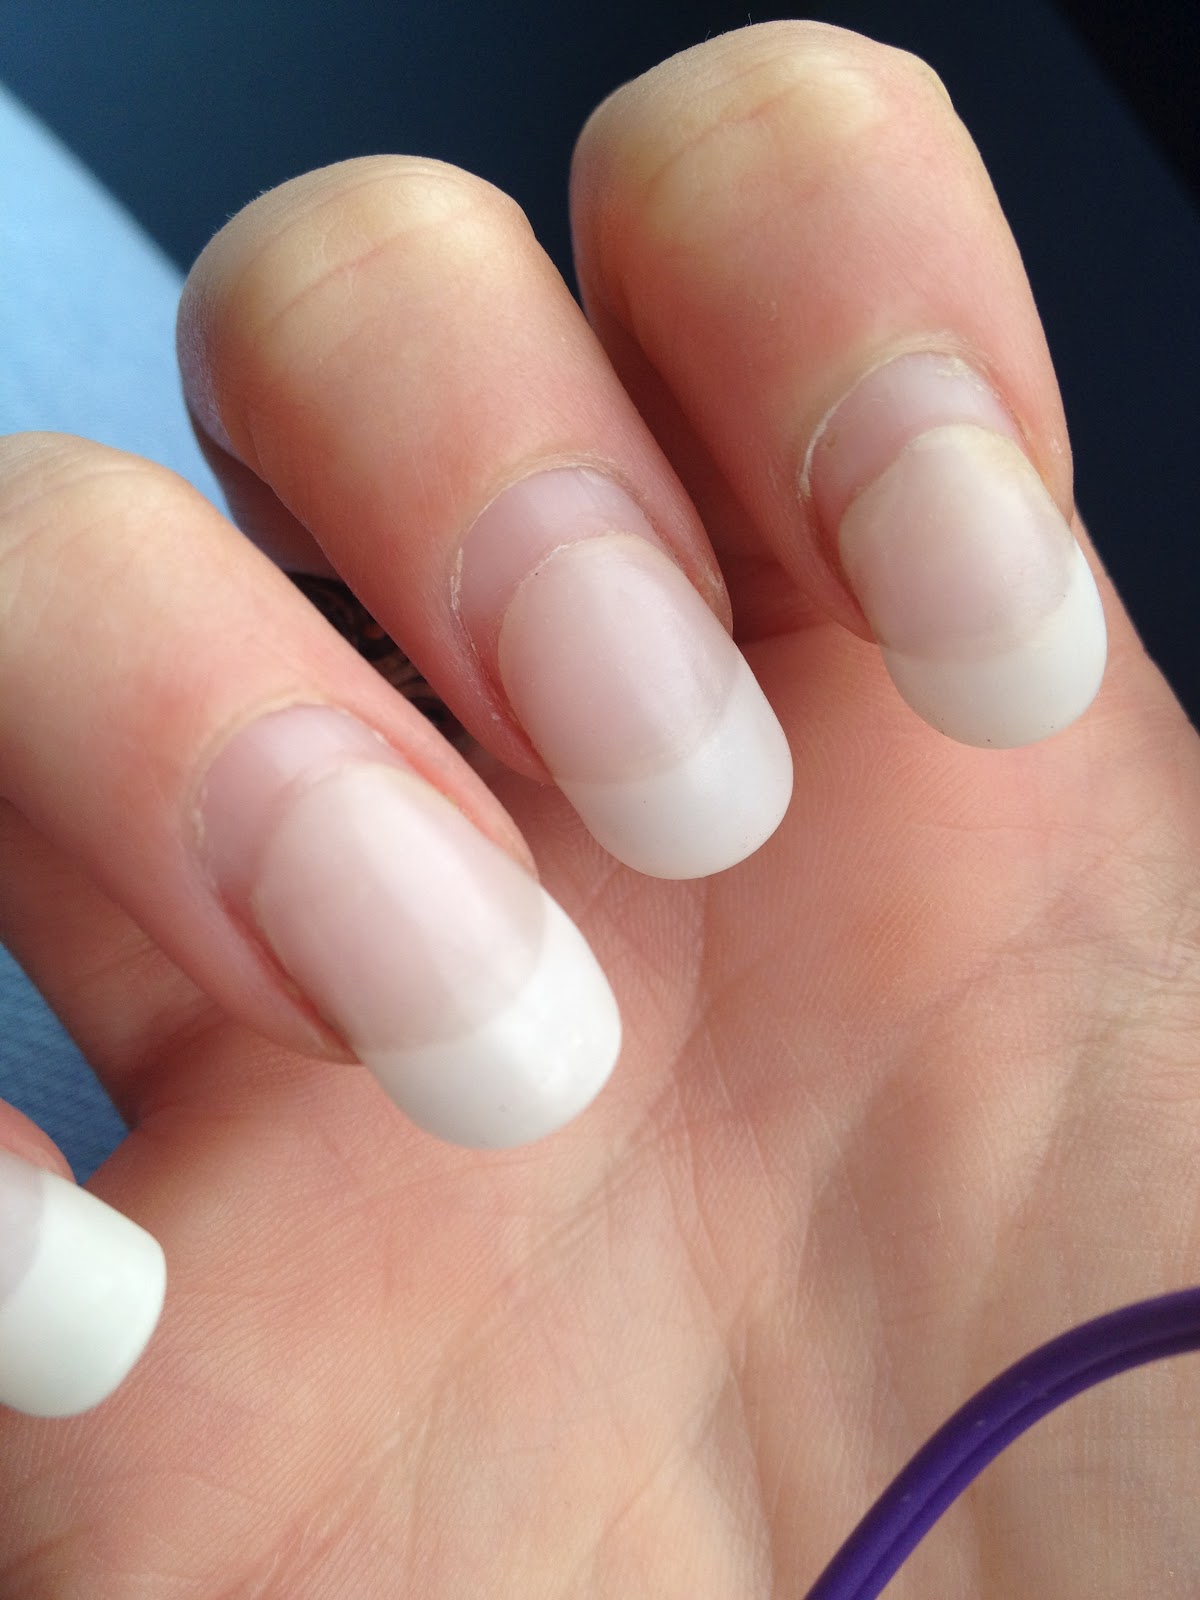 How Long Will My Nails Last? – Mission Nails